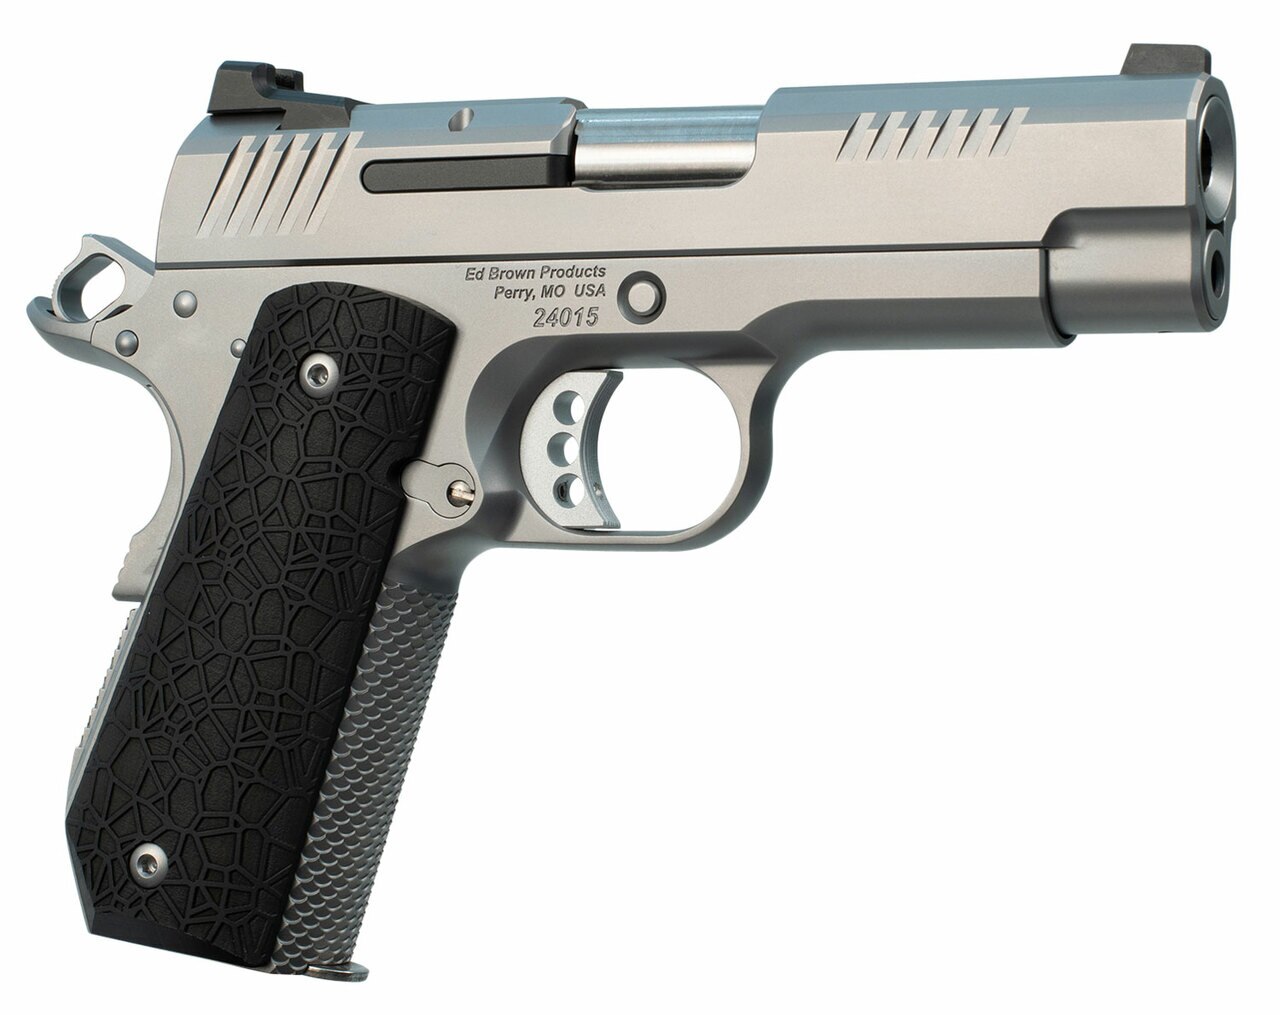 Image of Ed Brown Kobra Carry, Semi-automatic, 1911, Commander, 45ACP, 4.25" Barrel, Bobtail Frame, G10 Grips, Black, Thumb Safety, Black Fixed Rear Sight, Orange HD XR Front Sight, Recessed Slide Stop, 7Rd, 2 Magazines